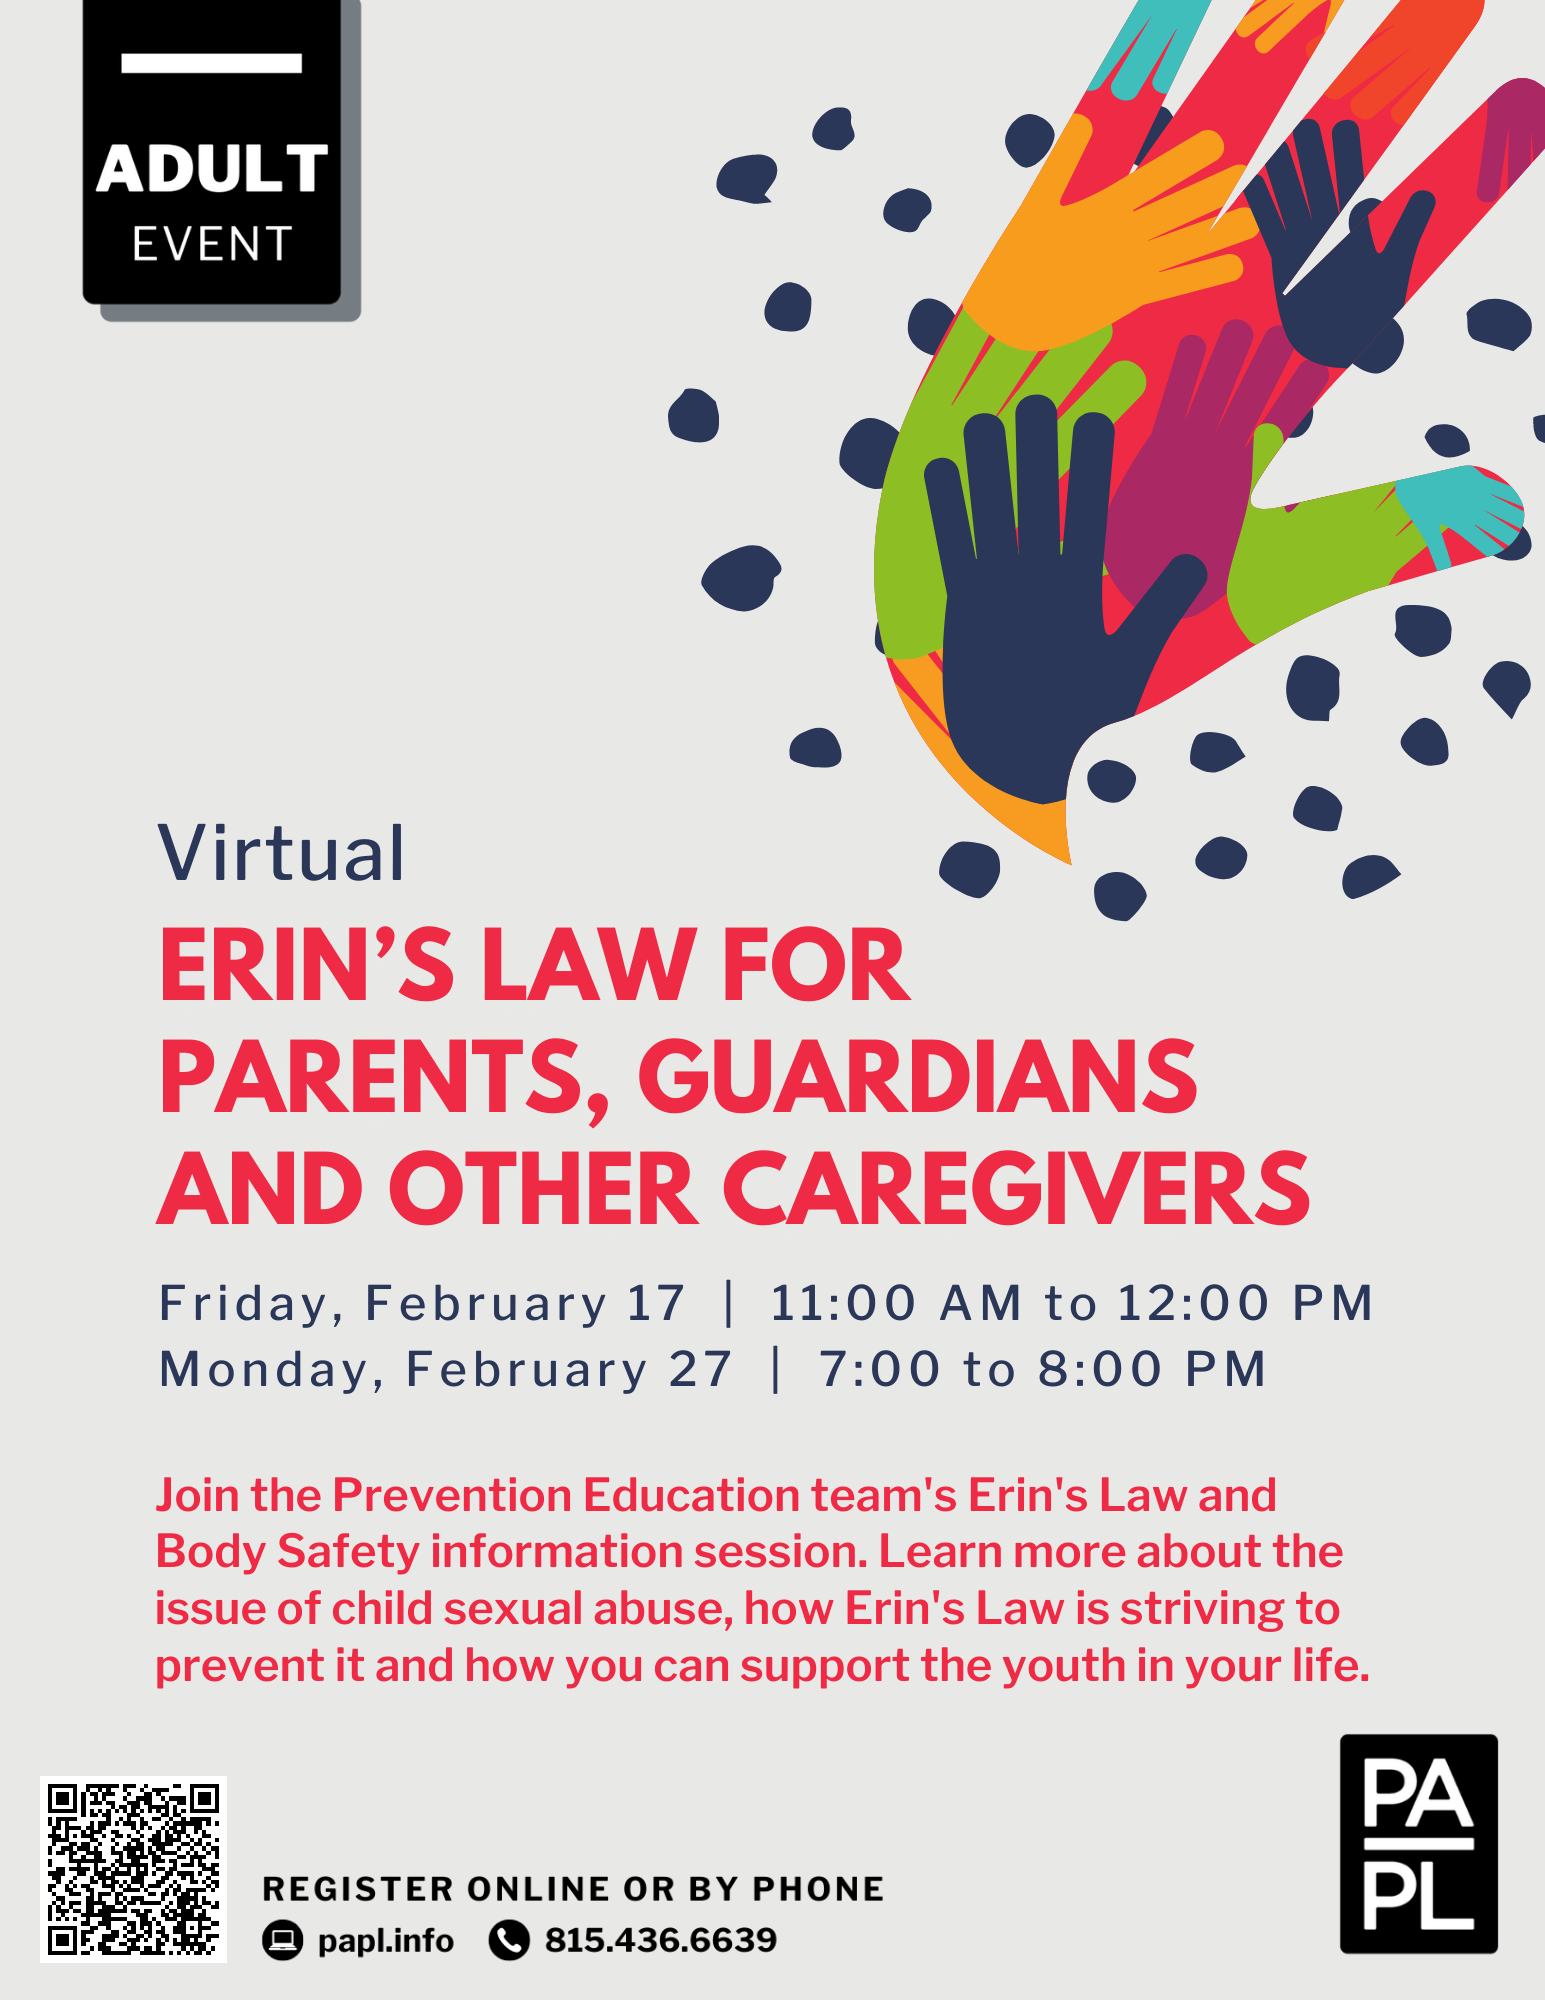 Virtual Erin’s Law for Parents, Guardians and Other Caregivers